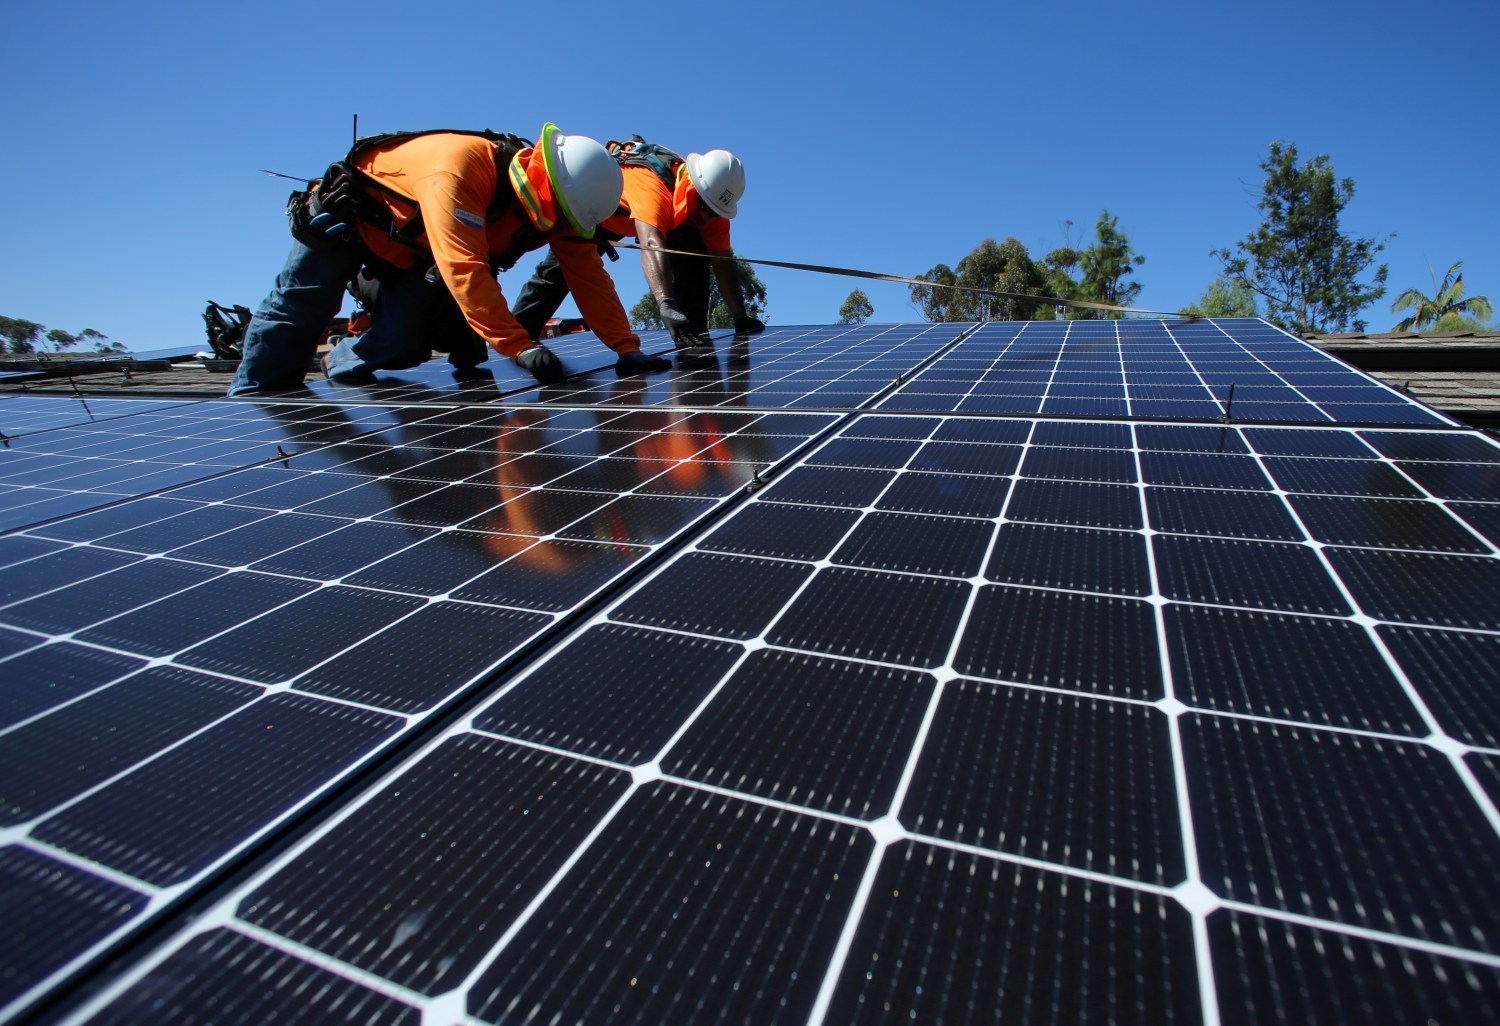 Solar installers from Baker Electric place solar panels on the roof of a residential home in Scripps Ranch, San Diego, California, U.S. October 14, 2016.  Picture taken October 14, 2016.      REUTERS/Mike Blake - S1AEUJDNLIAA